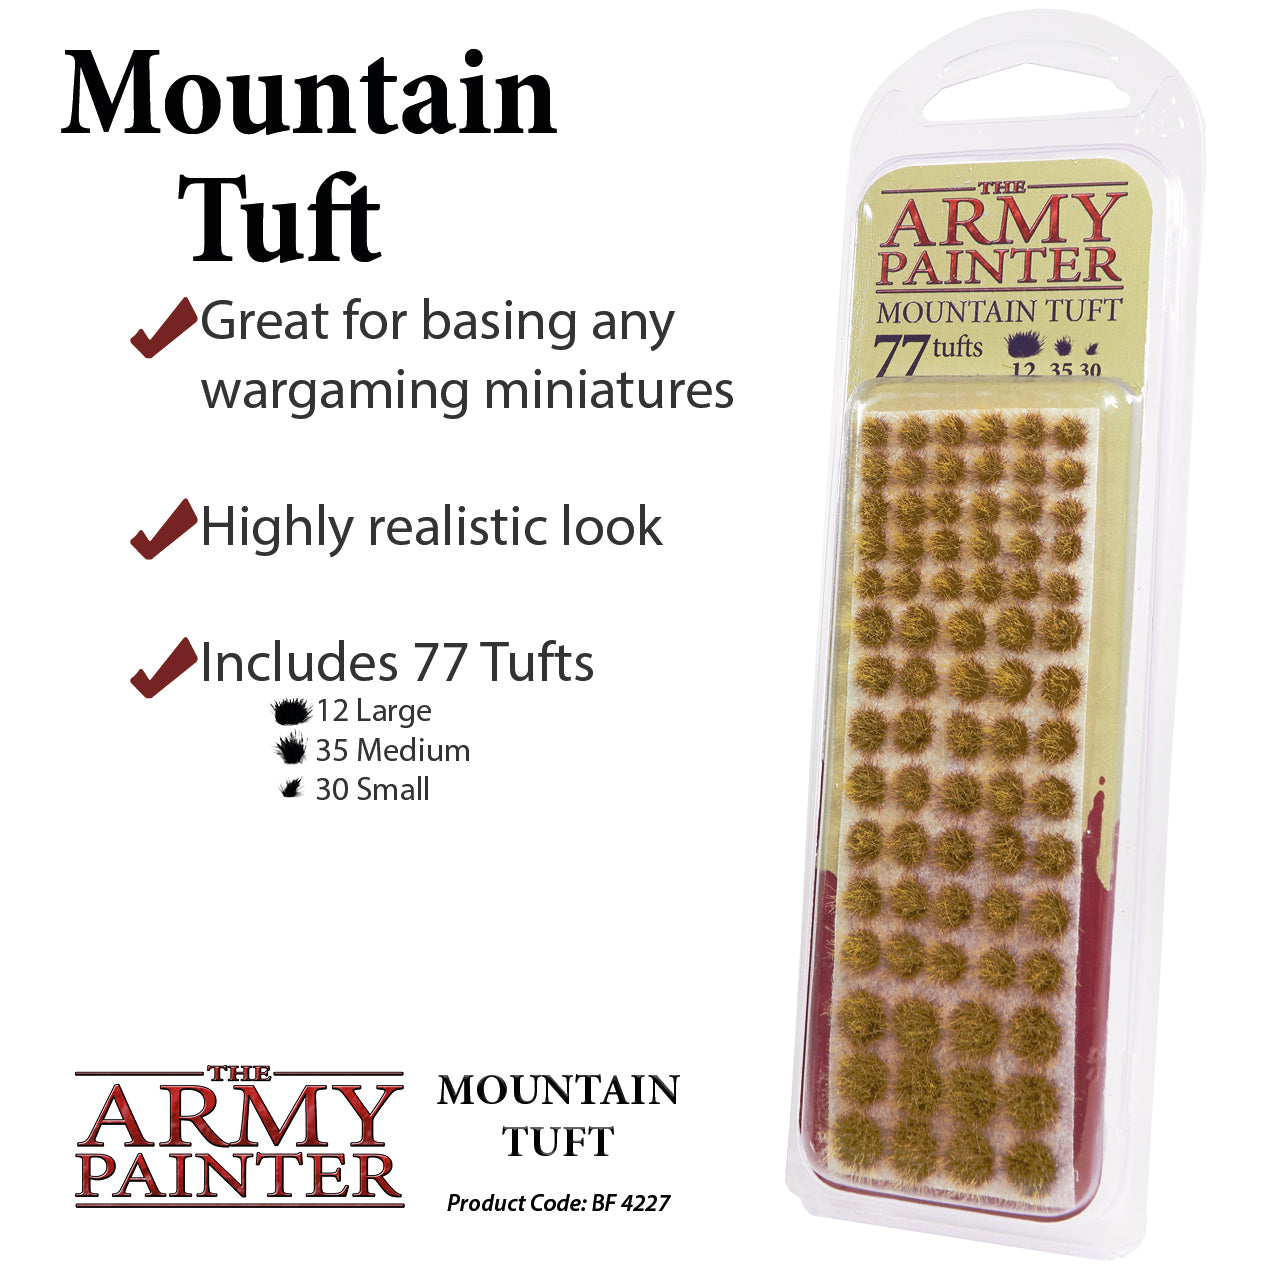 Mountain Tuft Battlefield Army Painter    | Red Claw Gaming